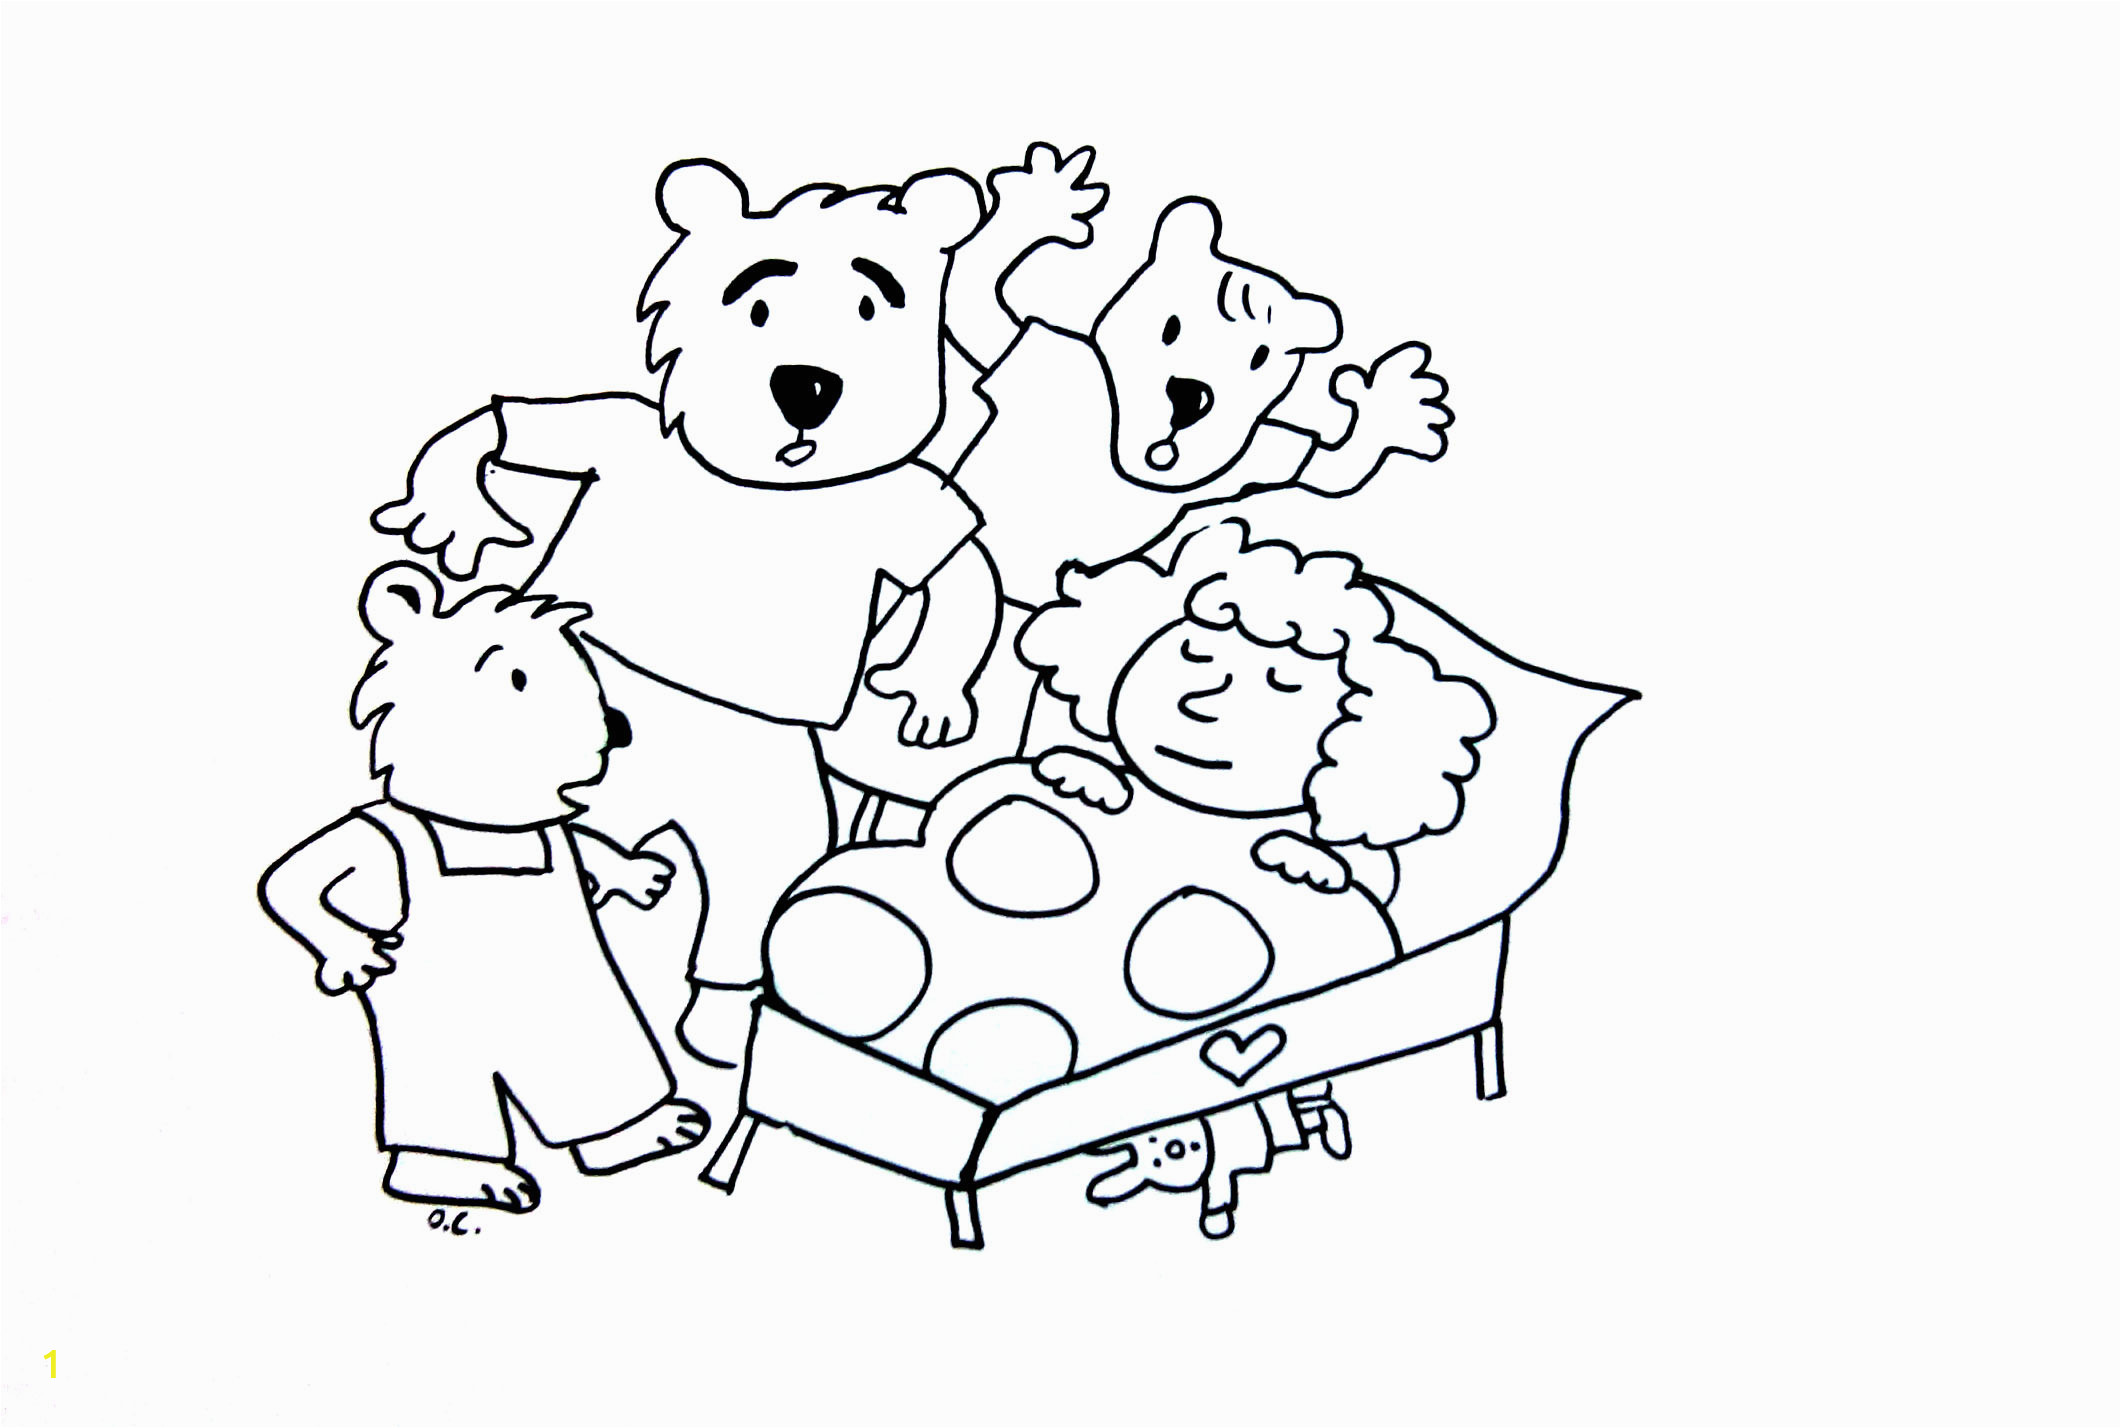 Goldilocks and the Three Bears Coloring Page Goldilocks and the Tree Bears Fairy Tales Coloring Pages